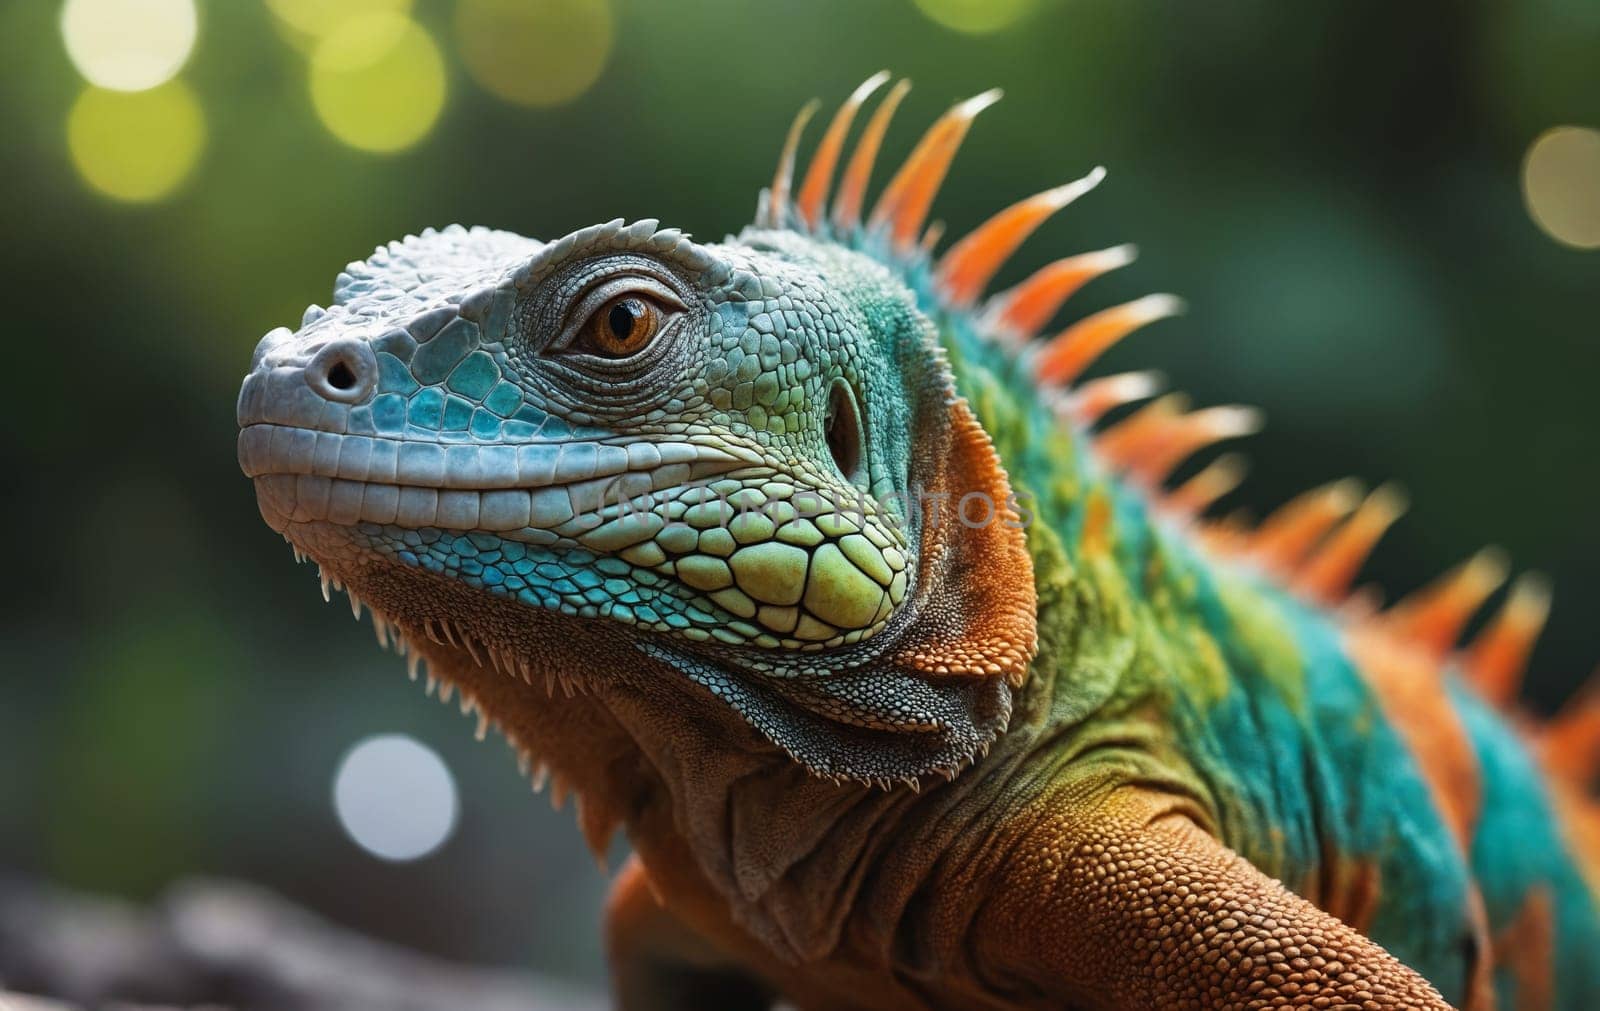 A closeup of an Iguanas face, a reptilian organism of the family Iguanidae. This scaled terrestrial animal showcases vibrant green and orange hues in a macro photography shot of wildlife